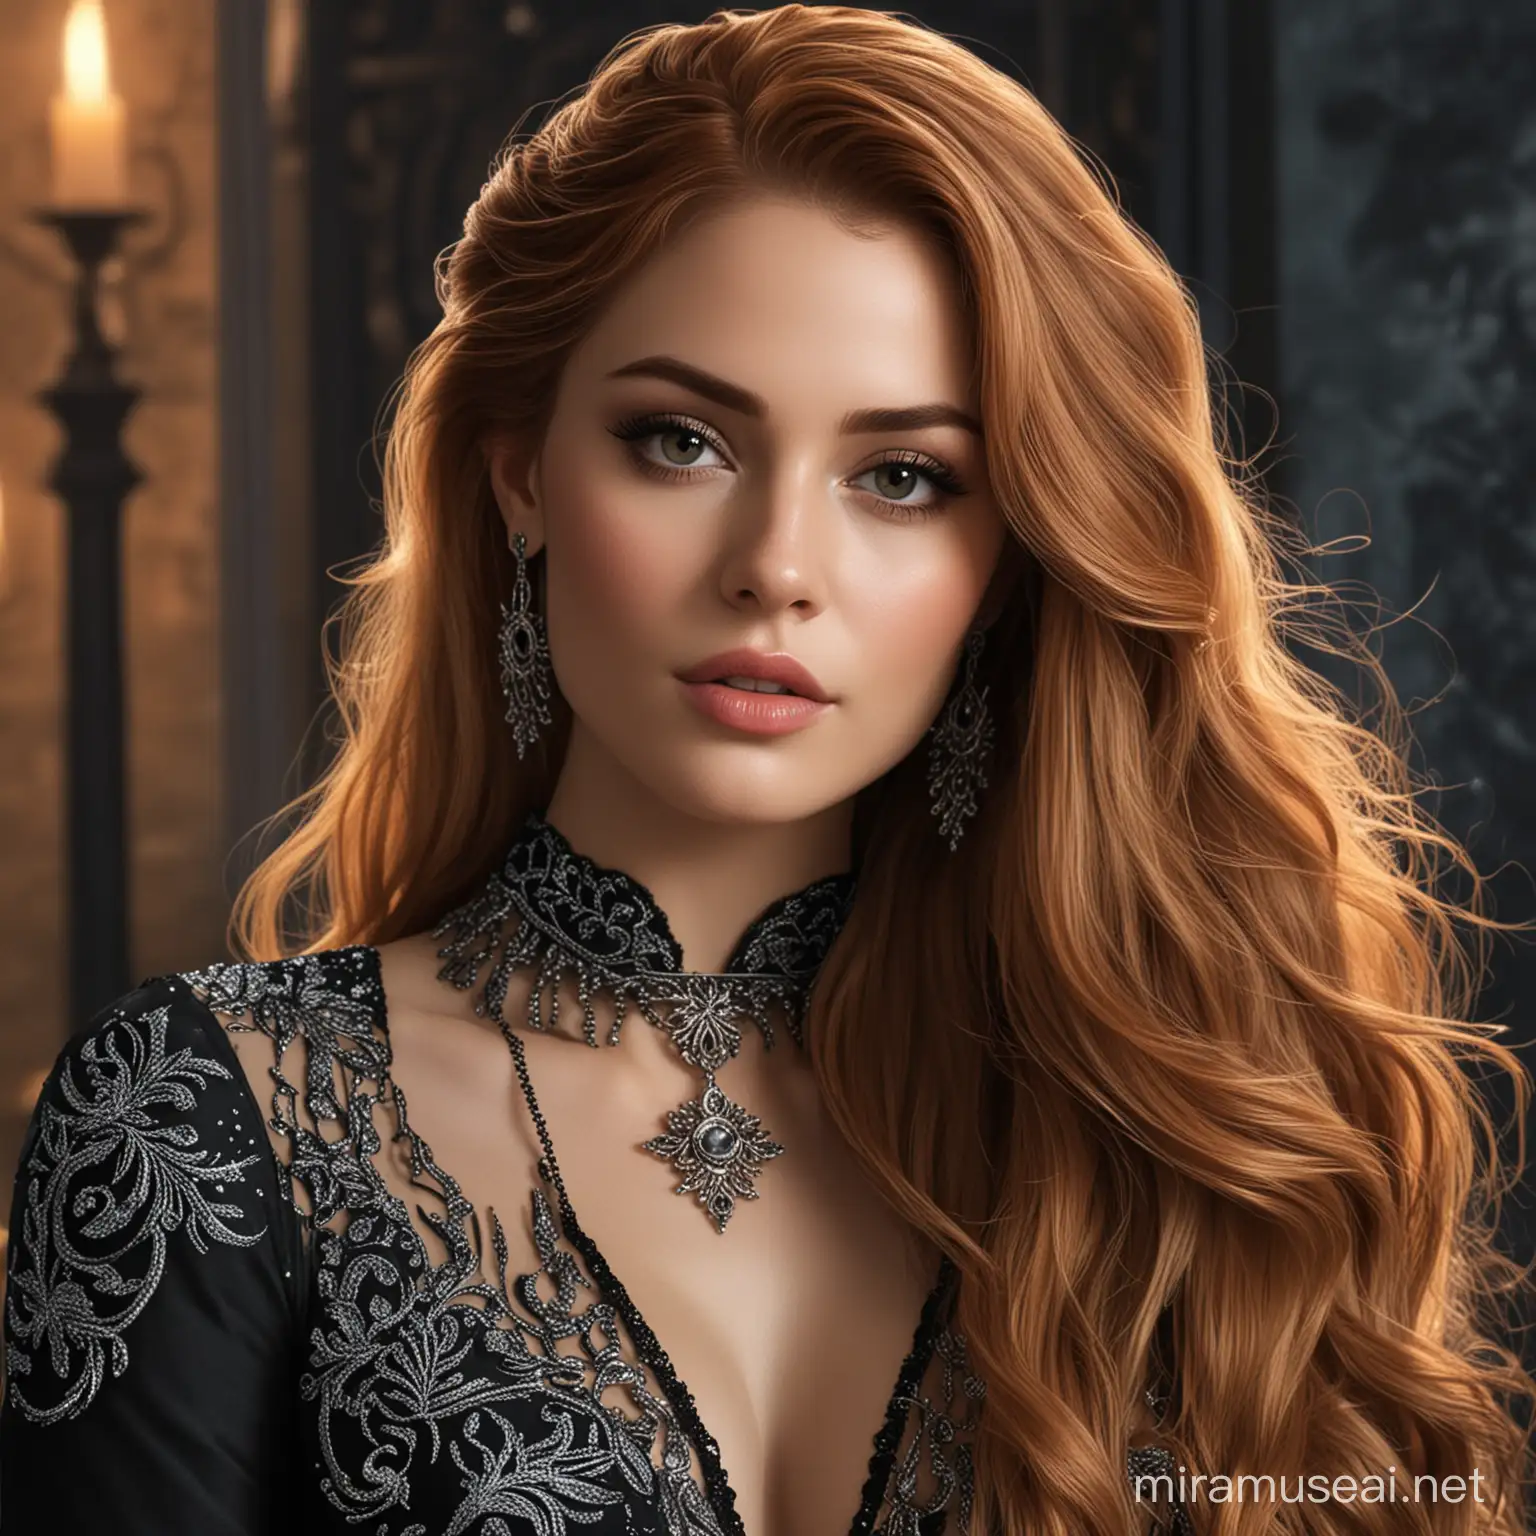 Feyre in a Magical Acotar Landscape